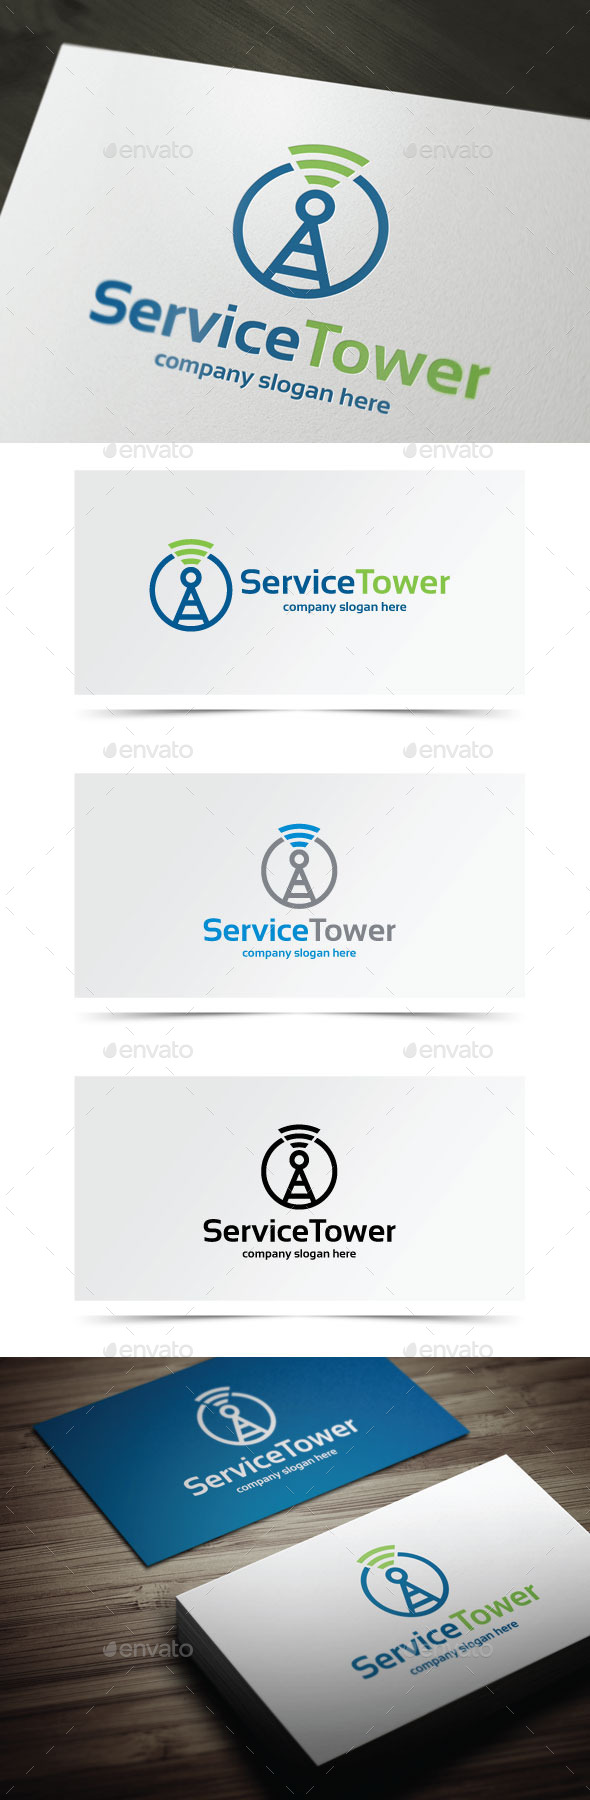 Service Tower